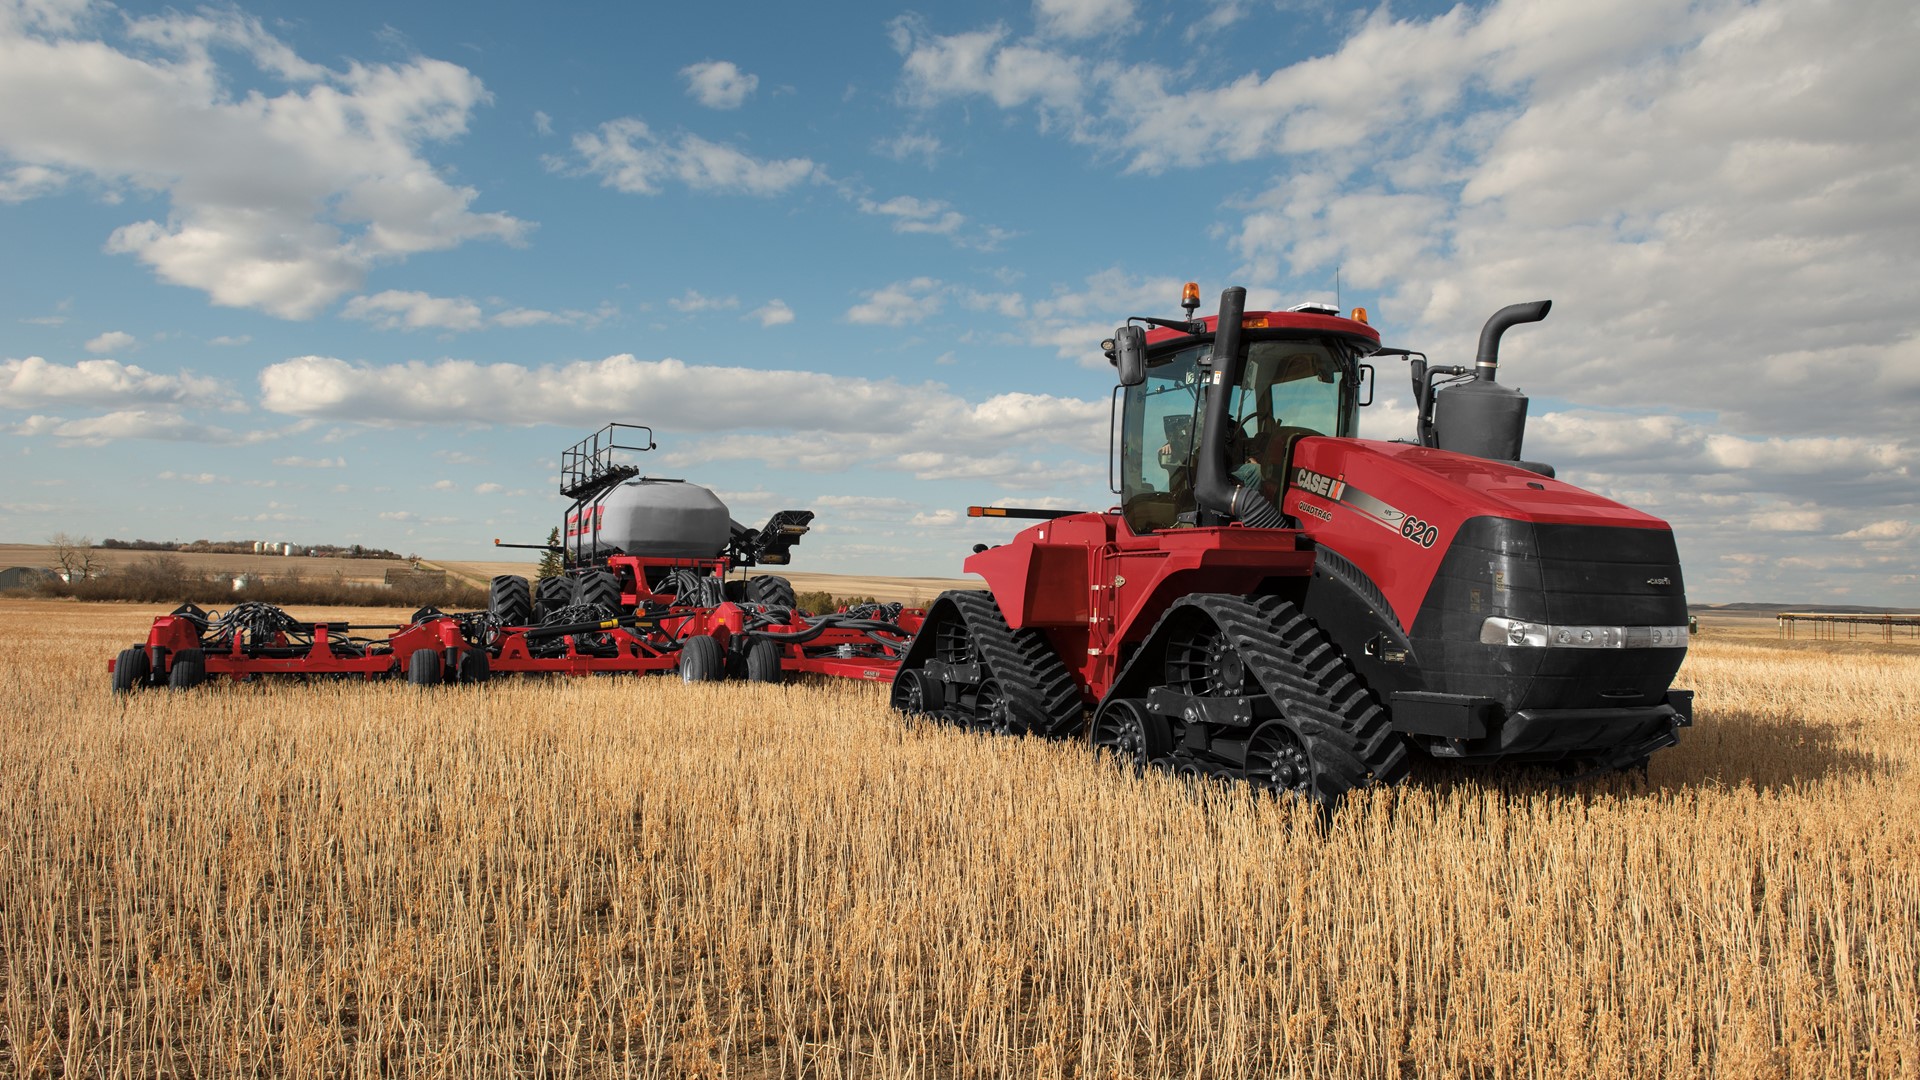 The Case IH Precision Disk 500DS air drill offers a one-pass solution